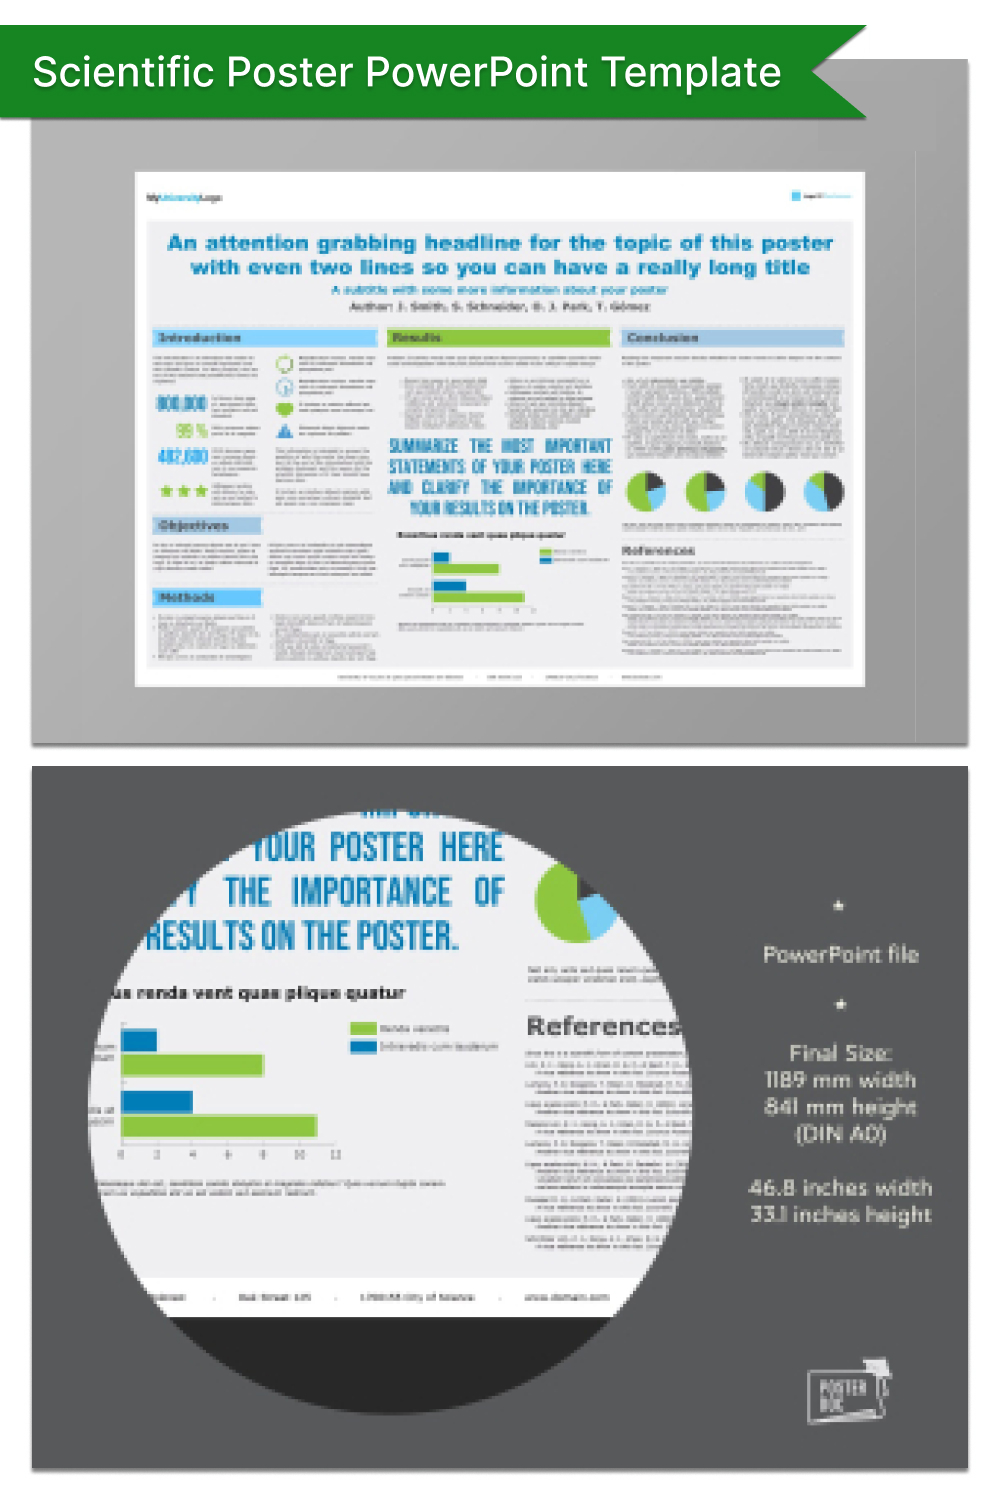 Pinterest of scientific poster powerpoint template.